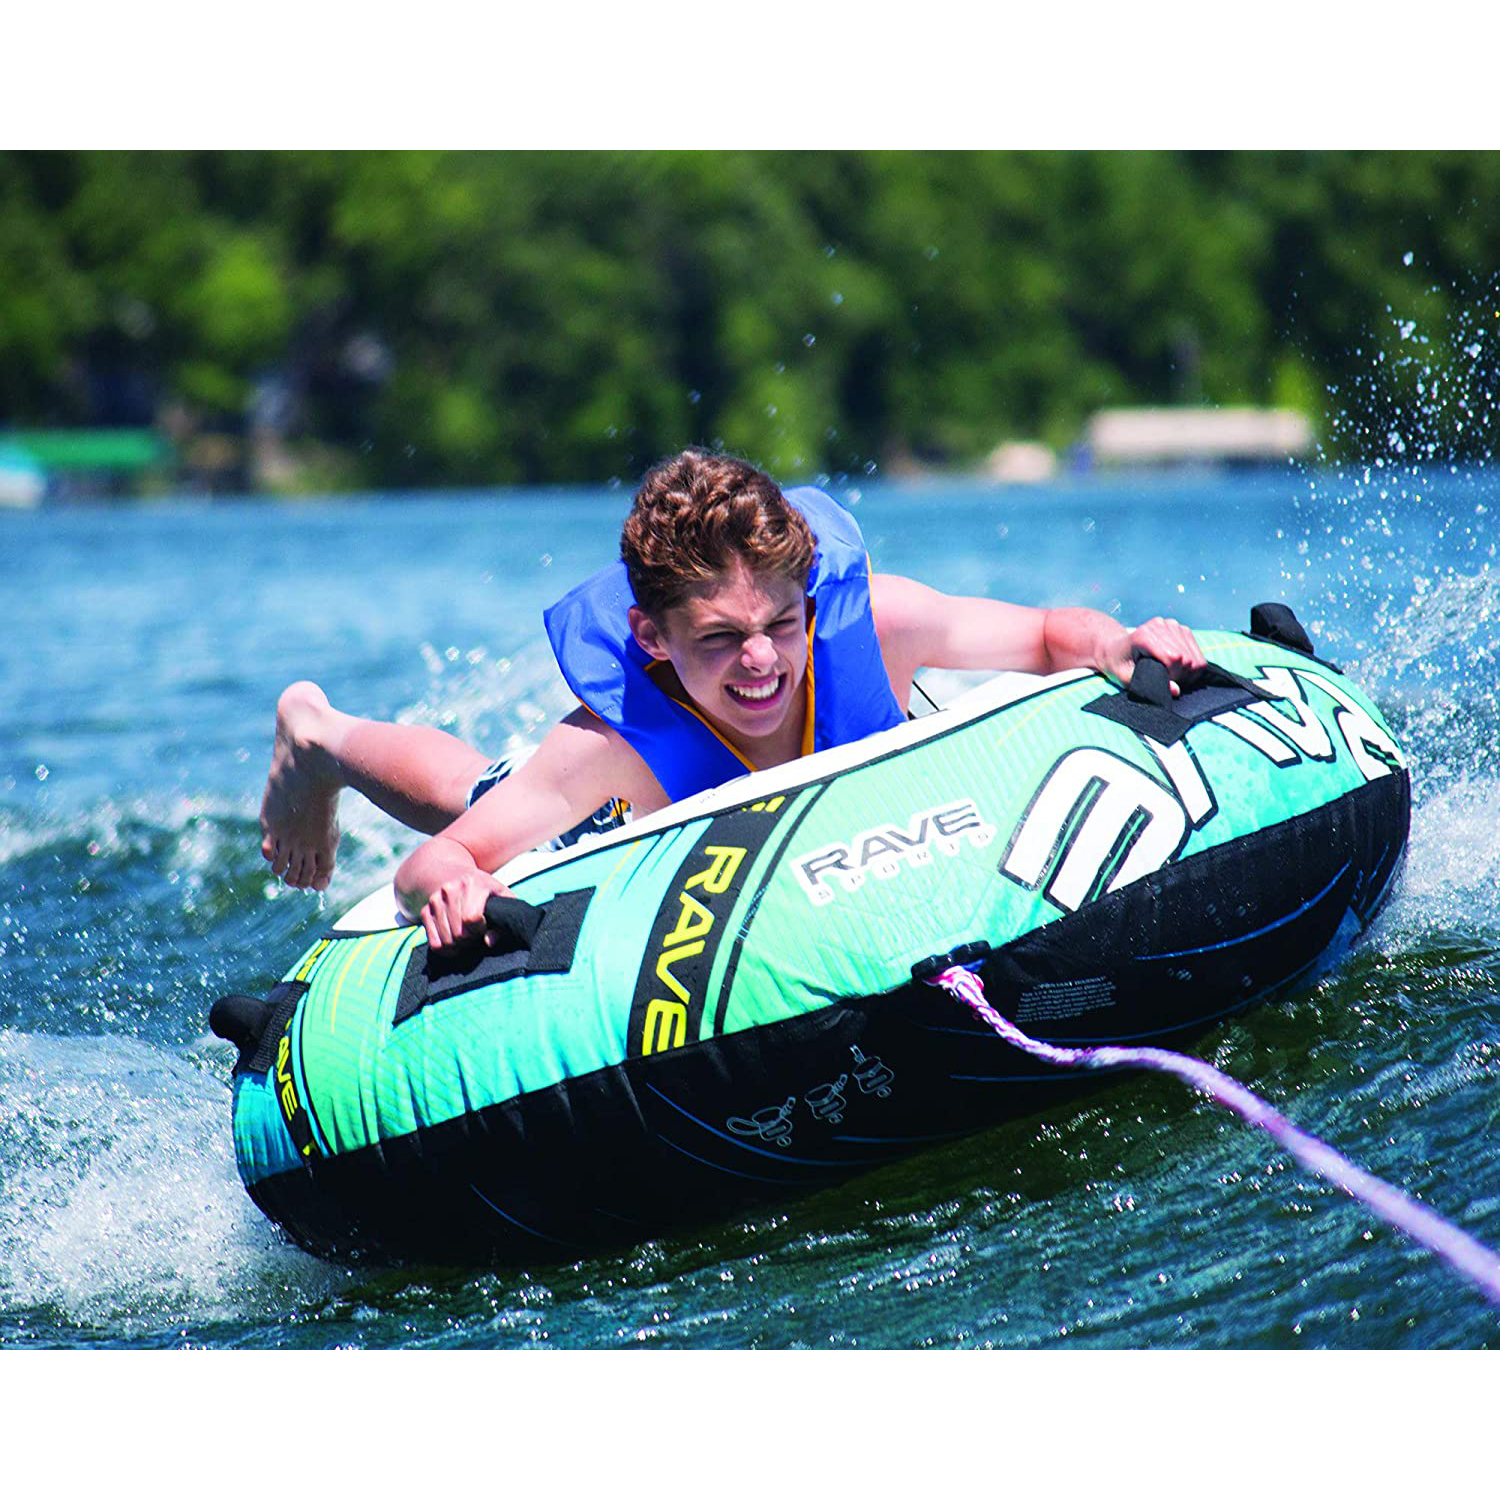 Blade 54 Inch 1 Rider Inflatable Boat Towable Water Ski Tube w/ 4 Handles, Blue - image 4 of 6